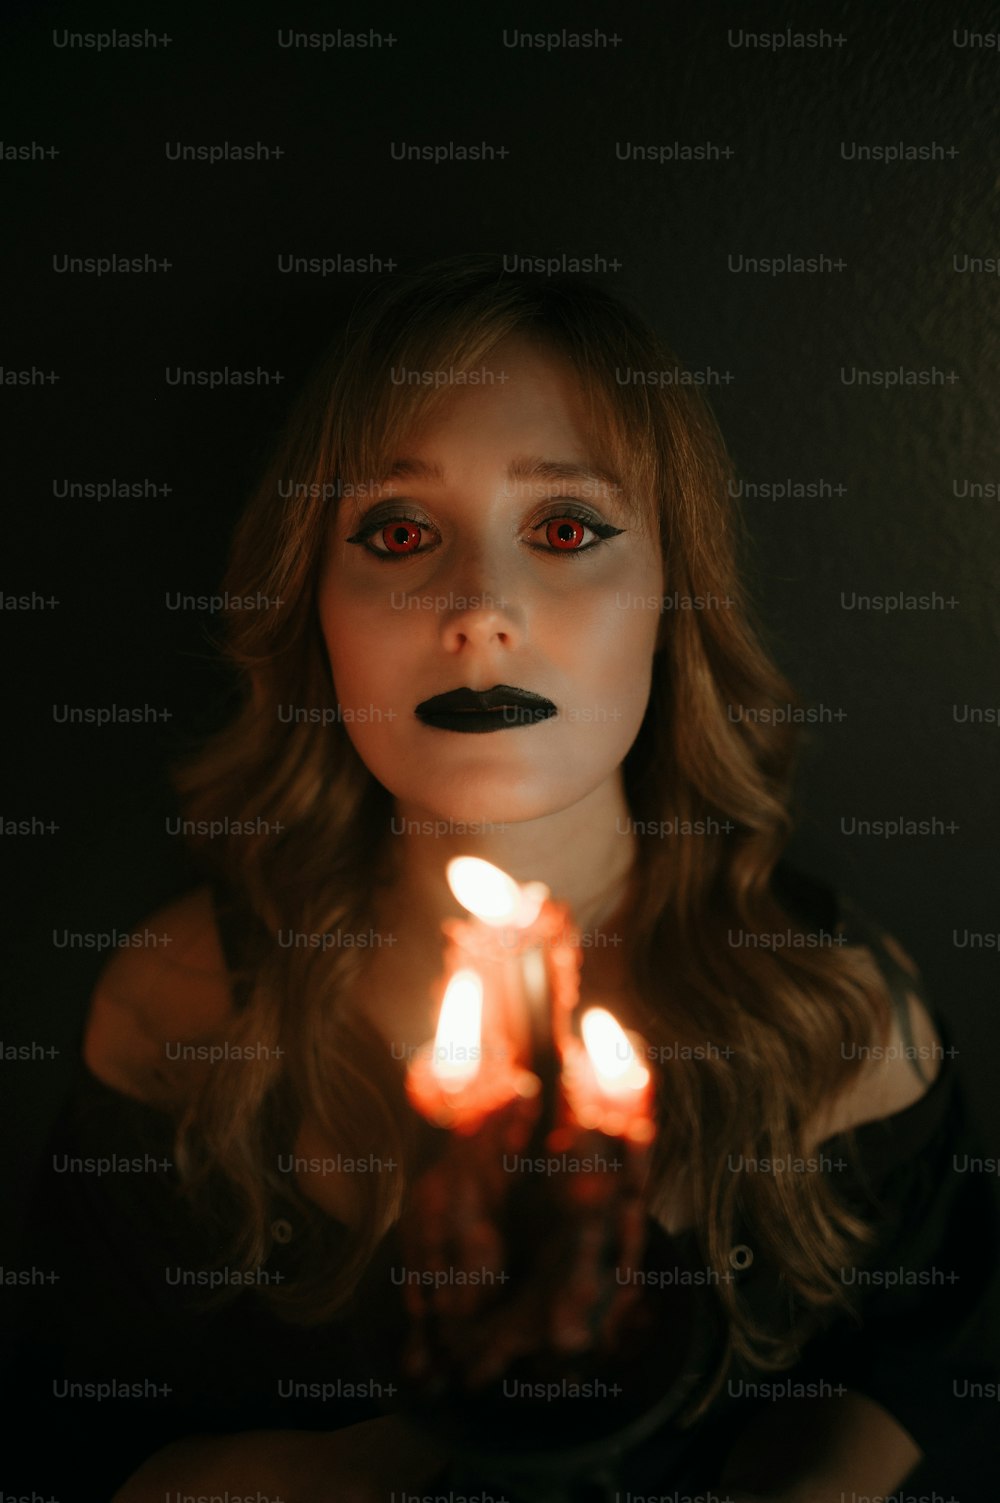 a woman with red eyes holding a lit candle